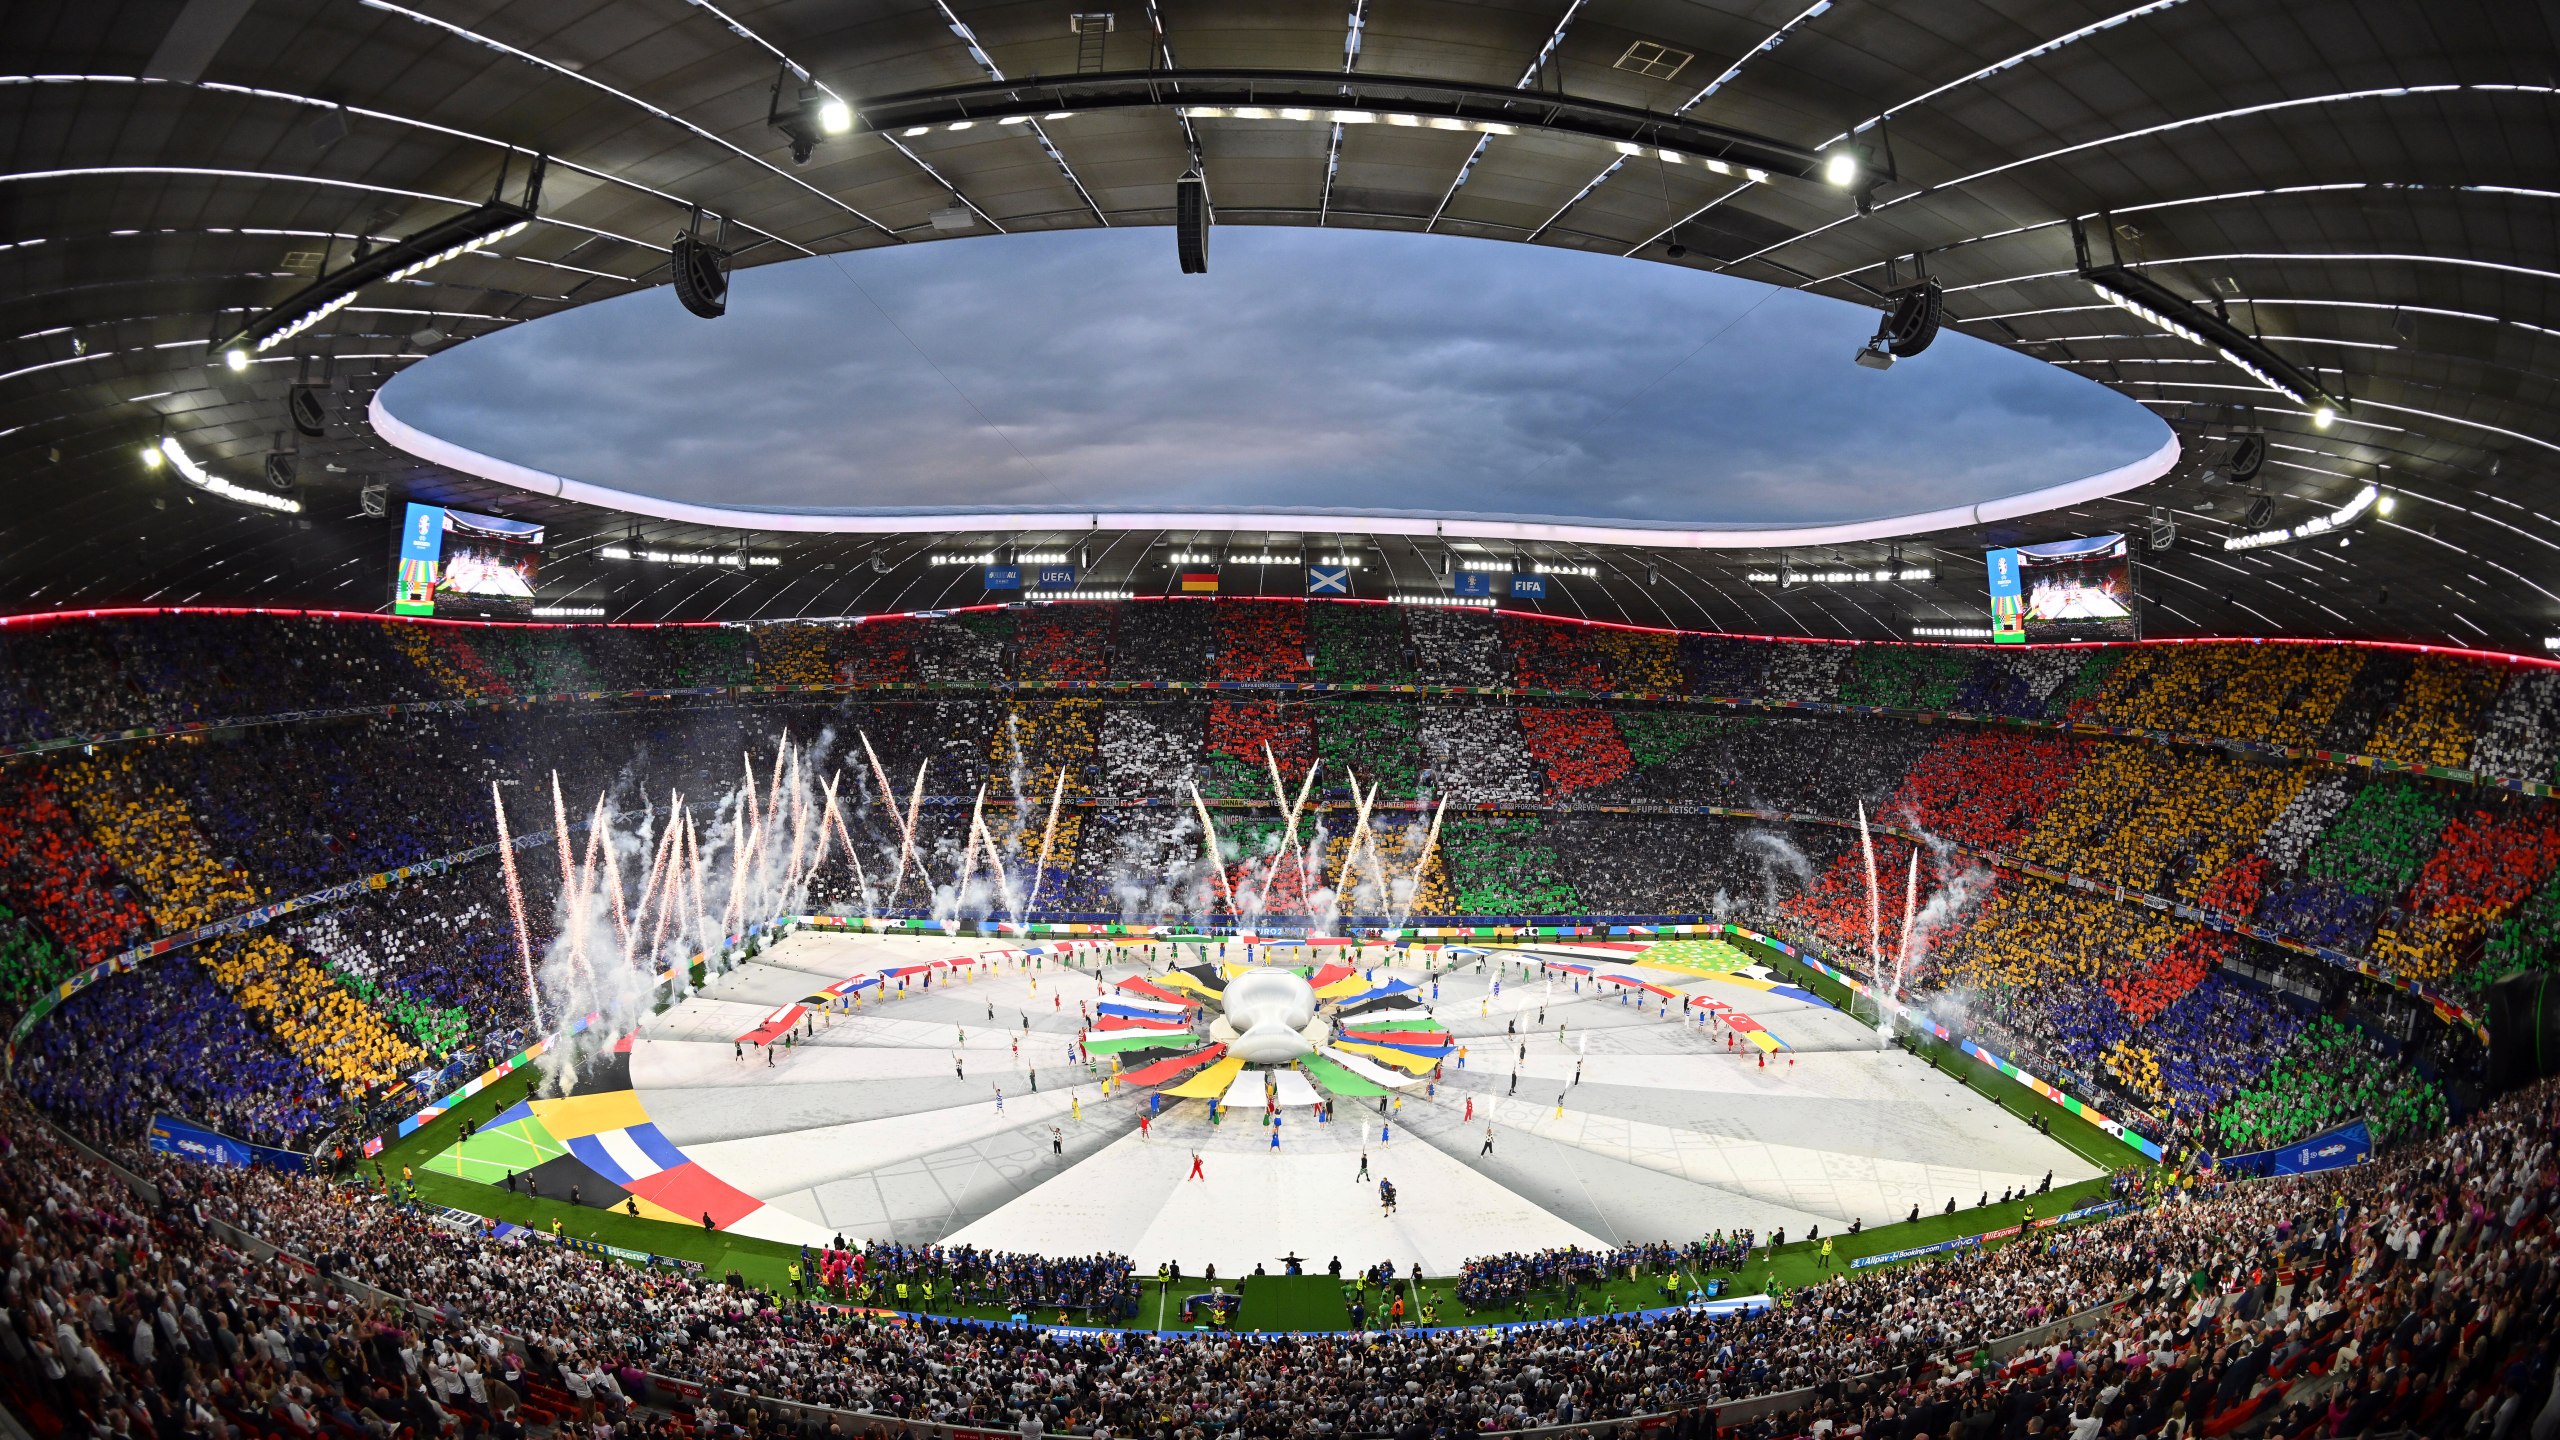 FILE - Dancers perform during the opening ceremony ahead of the Group A match between Germany and Scotland at the Euro 2024 soccer tournament in Munich, Germany, Friday, June 14, 2024. A German YouTuber says he made it onto the field during the European Championship opening ceremony while disguised in a mascot costume. Marvin Wildhage has published a video appearing to show how he entered the stadium in a fake costume and danced on the corner of the field during the ceremony before being led away by a UEFA staff member. (Peter Kneffel/dpa via AP, File)